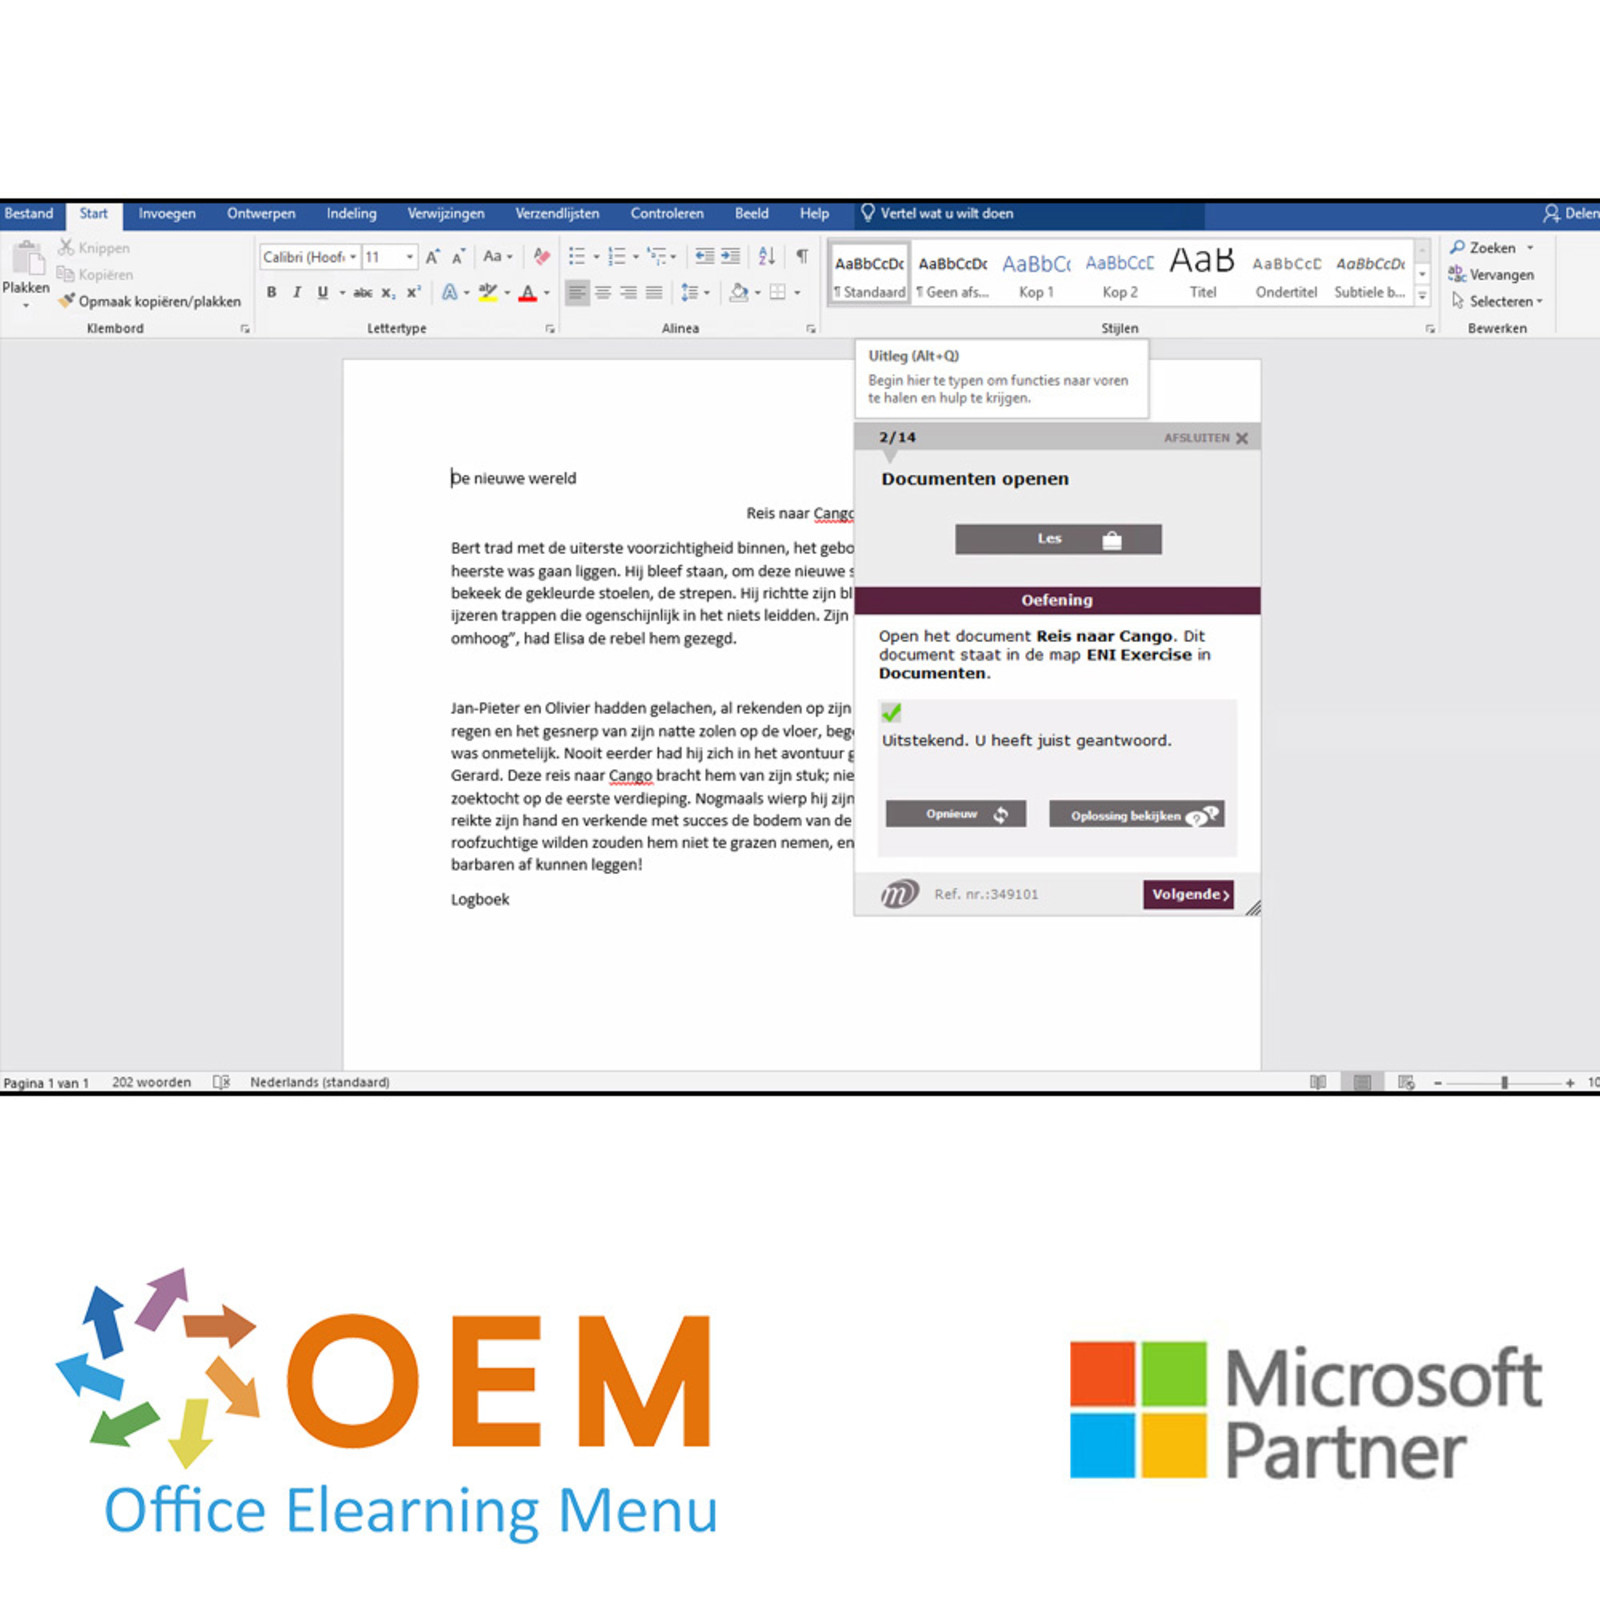 Microsoft Office 365 Office 365 2016 Course Basic Advanced Expert E-Learning